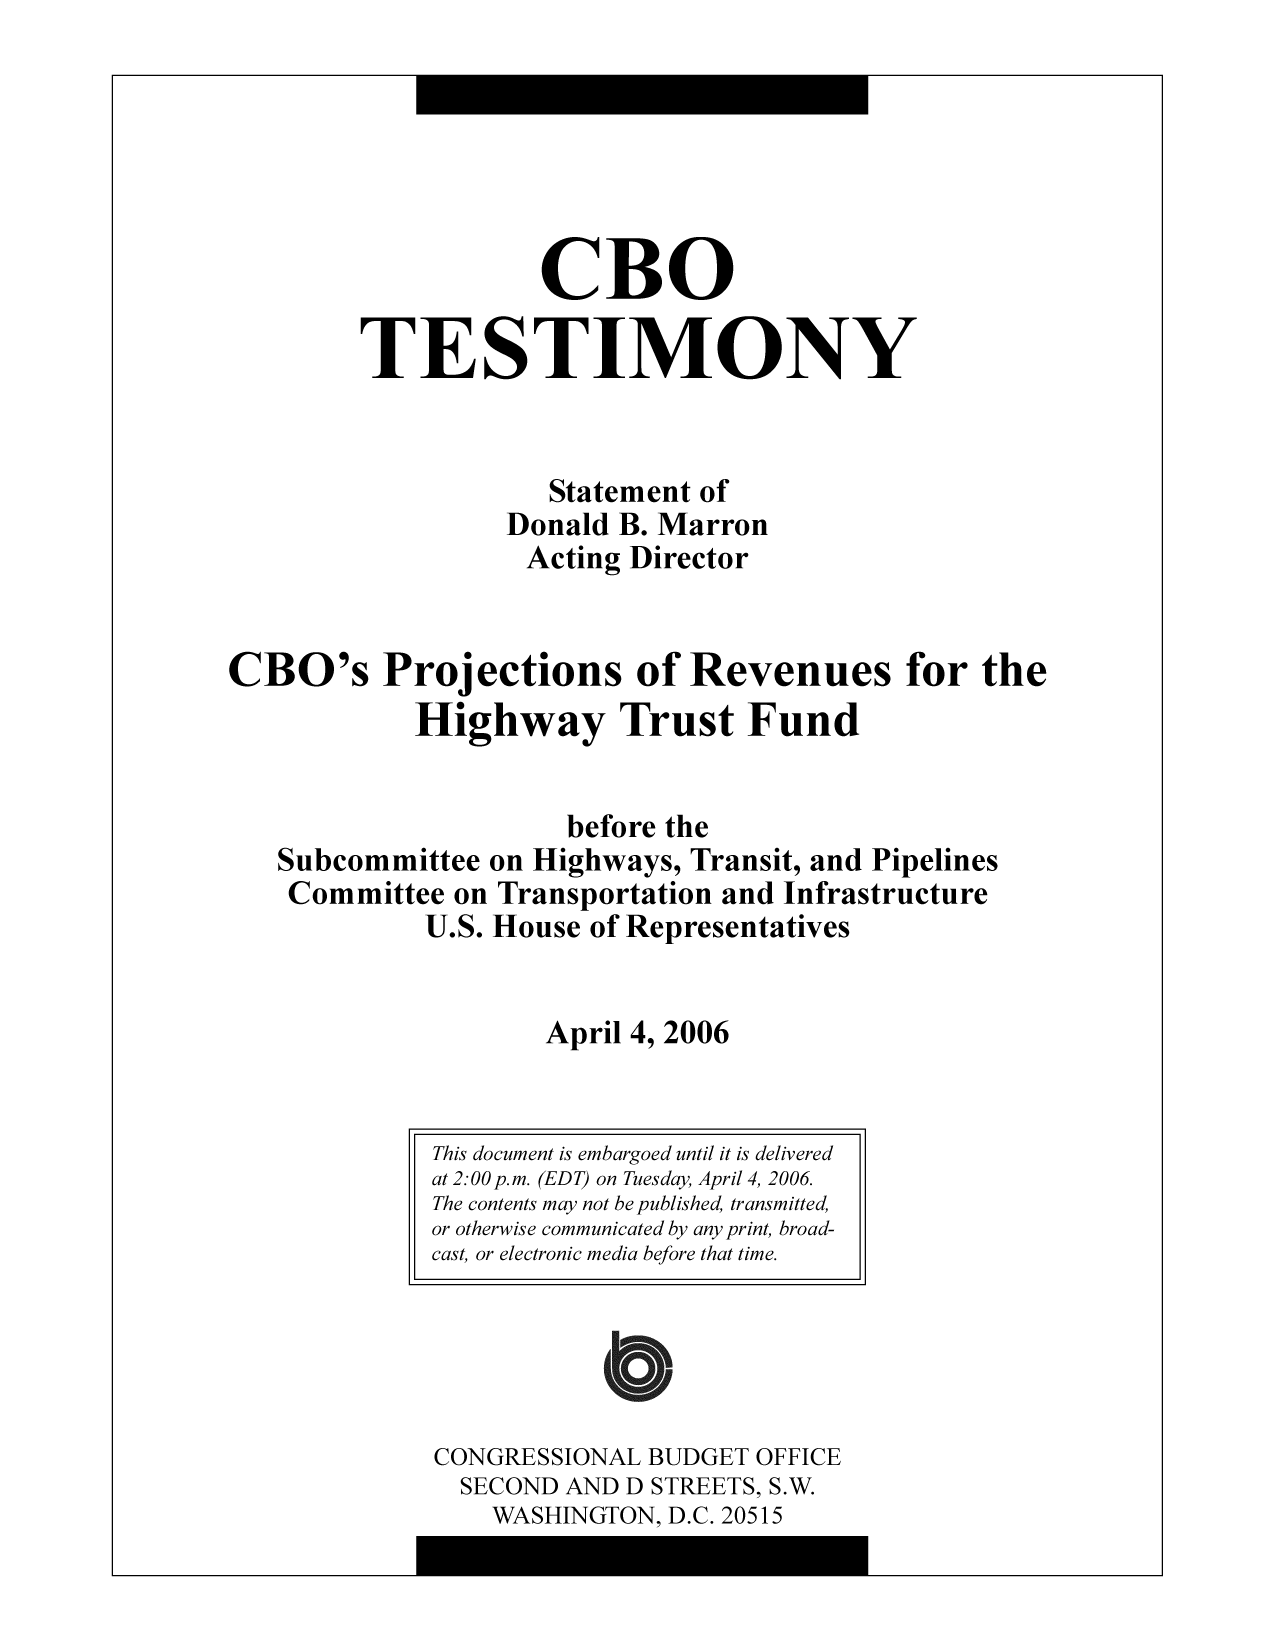 handle is hein.congrec/cbo10324 and id is 1 raw text is: CBO
TESTIMONY
Statement of
Donald B. Marron
Acting Director
CBO's Projections of Revenues for the
Highway Trust Fund
before the
Subcommittee on Highways, Transit, and Pipelines
Committee on Transportation and Infrastructure
U.S. House of Representatives
April 4, 2006

CONGRESSIONAL BUDGET OFFICE
SECOND AND D STREETS, S.W.
WASHINGTON, D.C. 20515

This document is embargoed until it is delivered
at 2:00 p.m. (EDT) on Tuesday, April 4, 2006
The contents may not be published, transmitted,
or otherwise communicated by any print, broad-
cast, or electronic media before that time.


